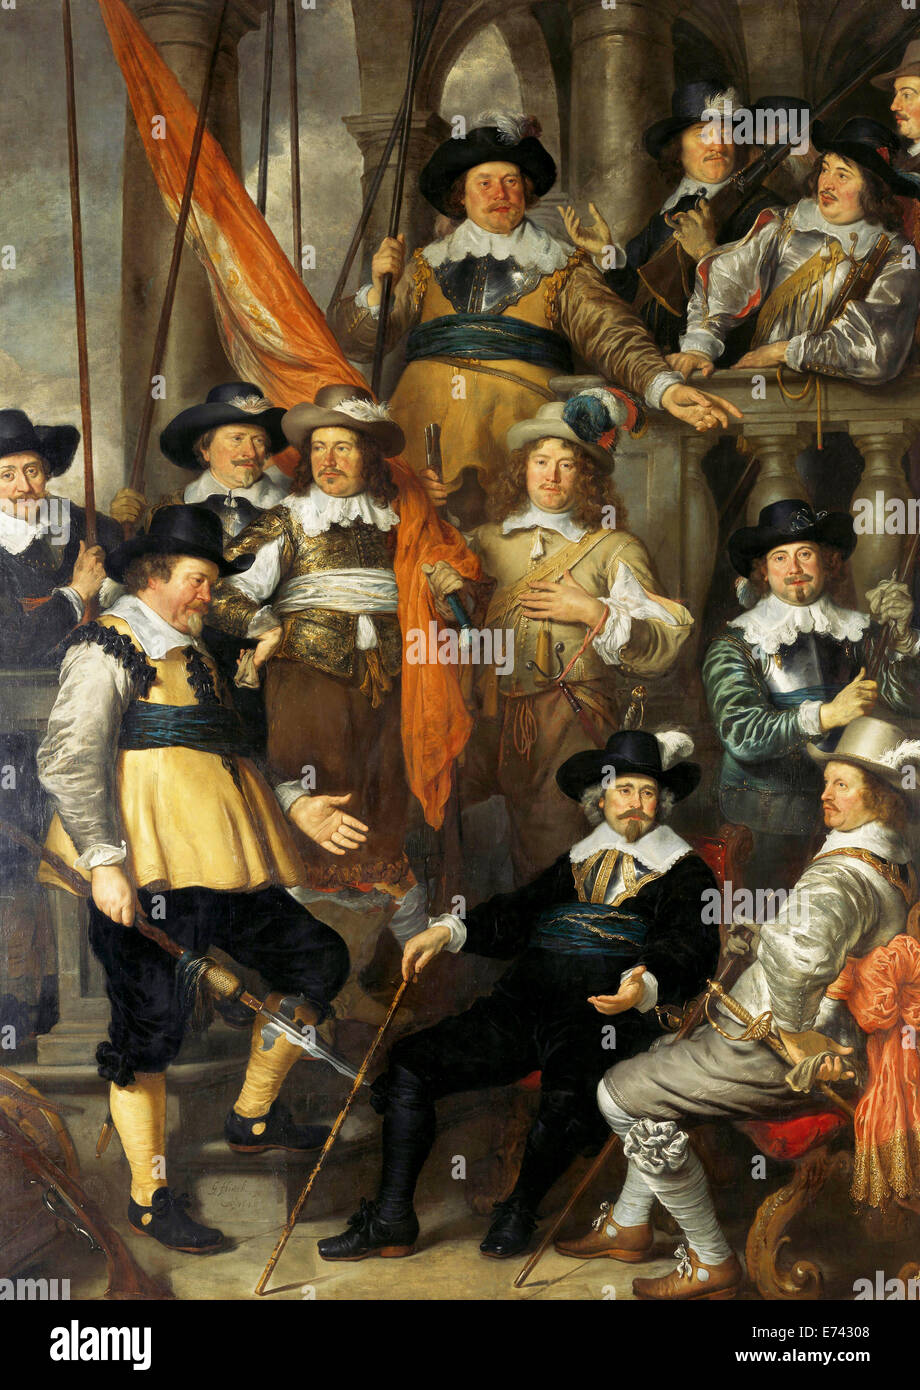 Officers and shooters in Amsterdam district XVIII, led by Captain Albert Bas and Lieutenant Lucas Conijn - by Govert Flinc, 1645 Stock Photo